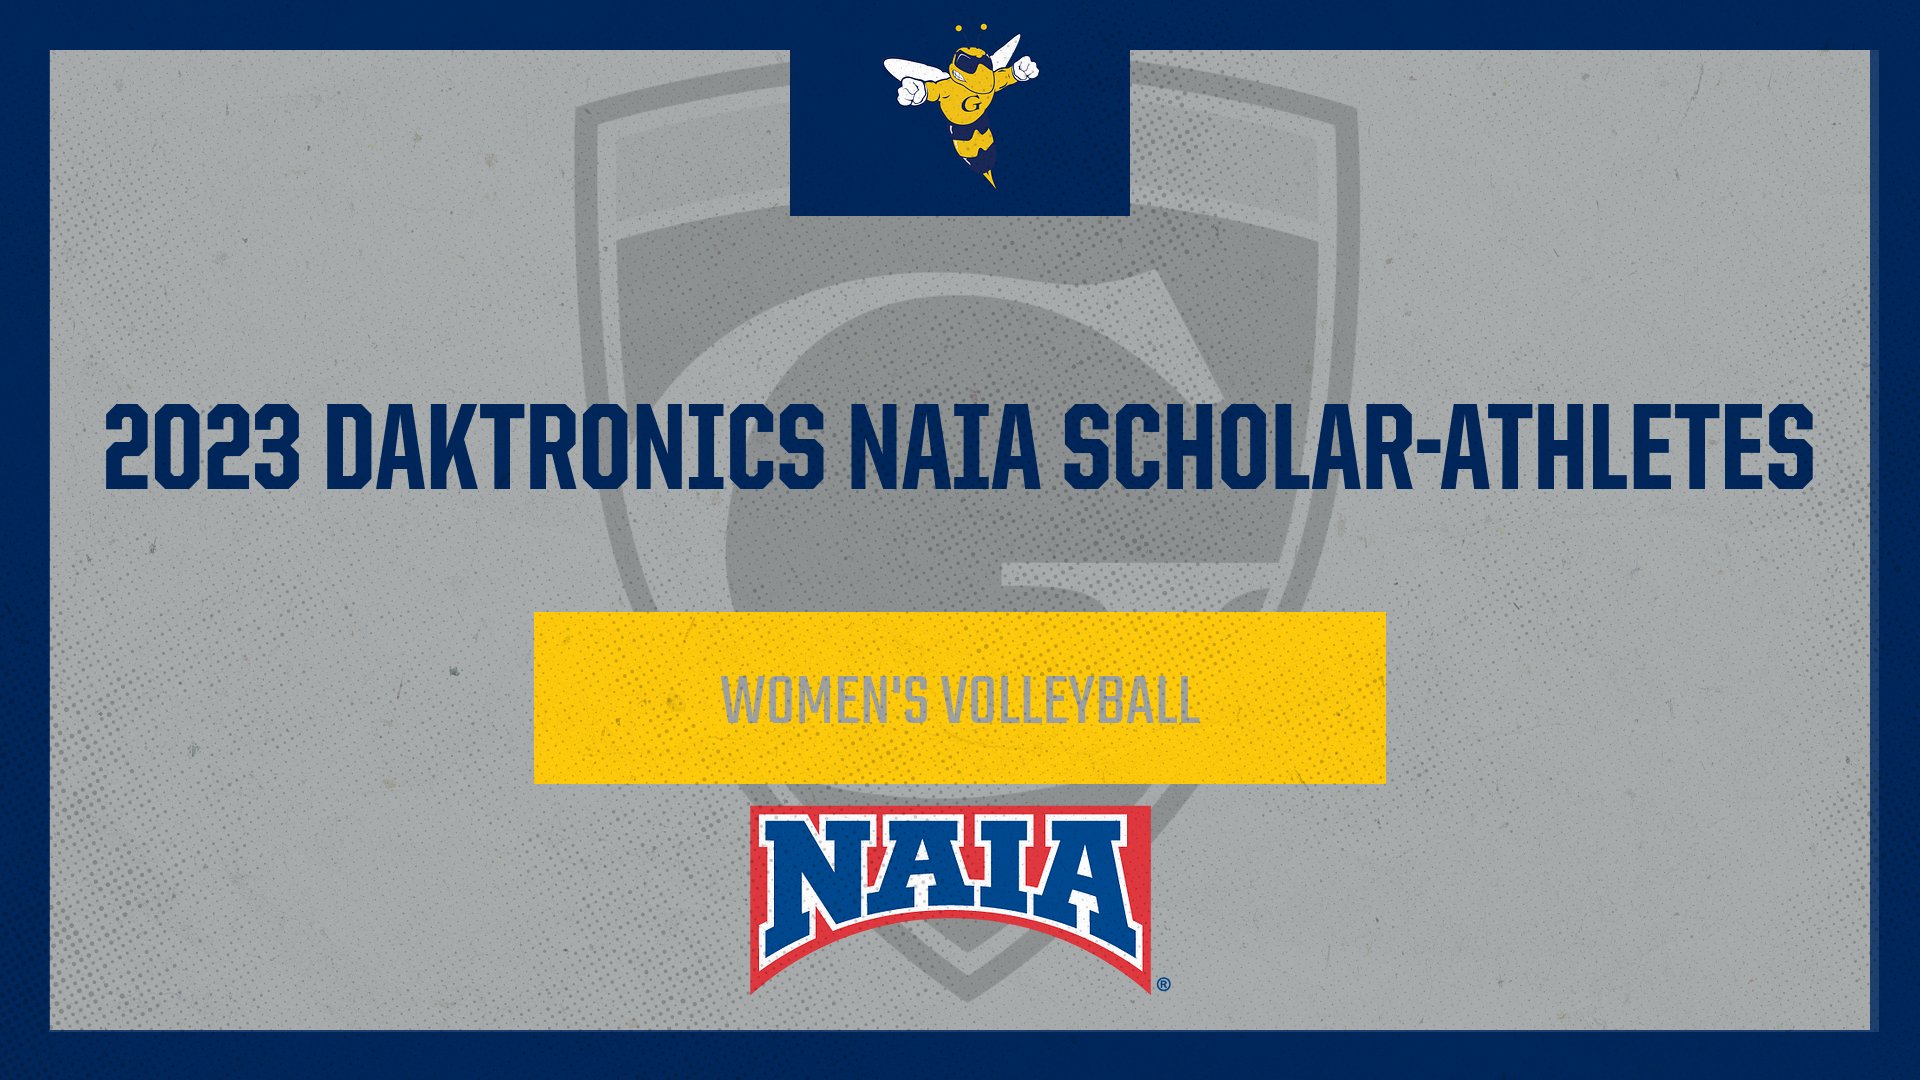 Women&rsquo;s Volleyball Led the 2023 Daktronics NAIA Women&rsquo;s Volleyball Scholar-Athlete with 20 Honorees